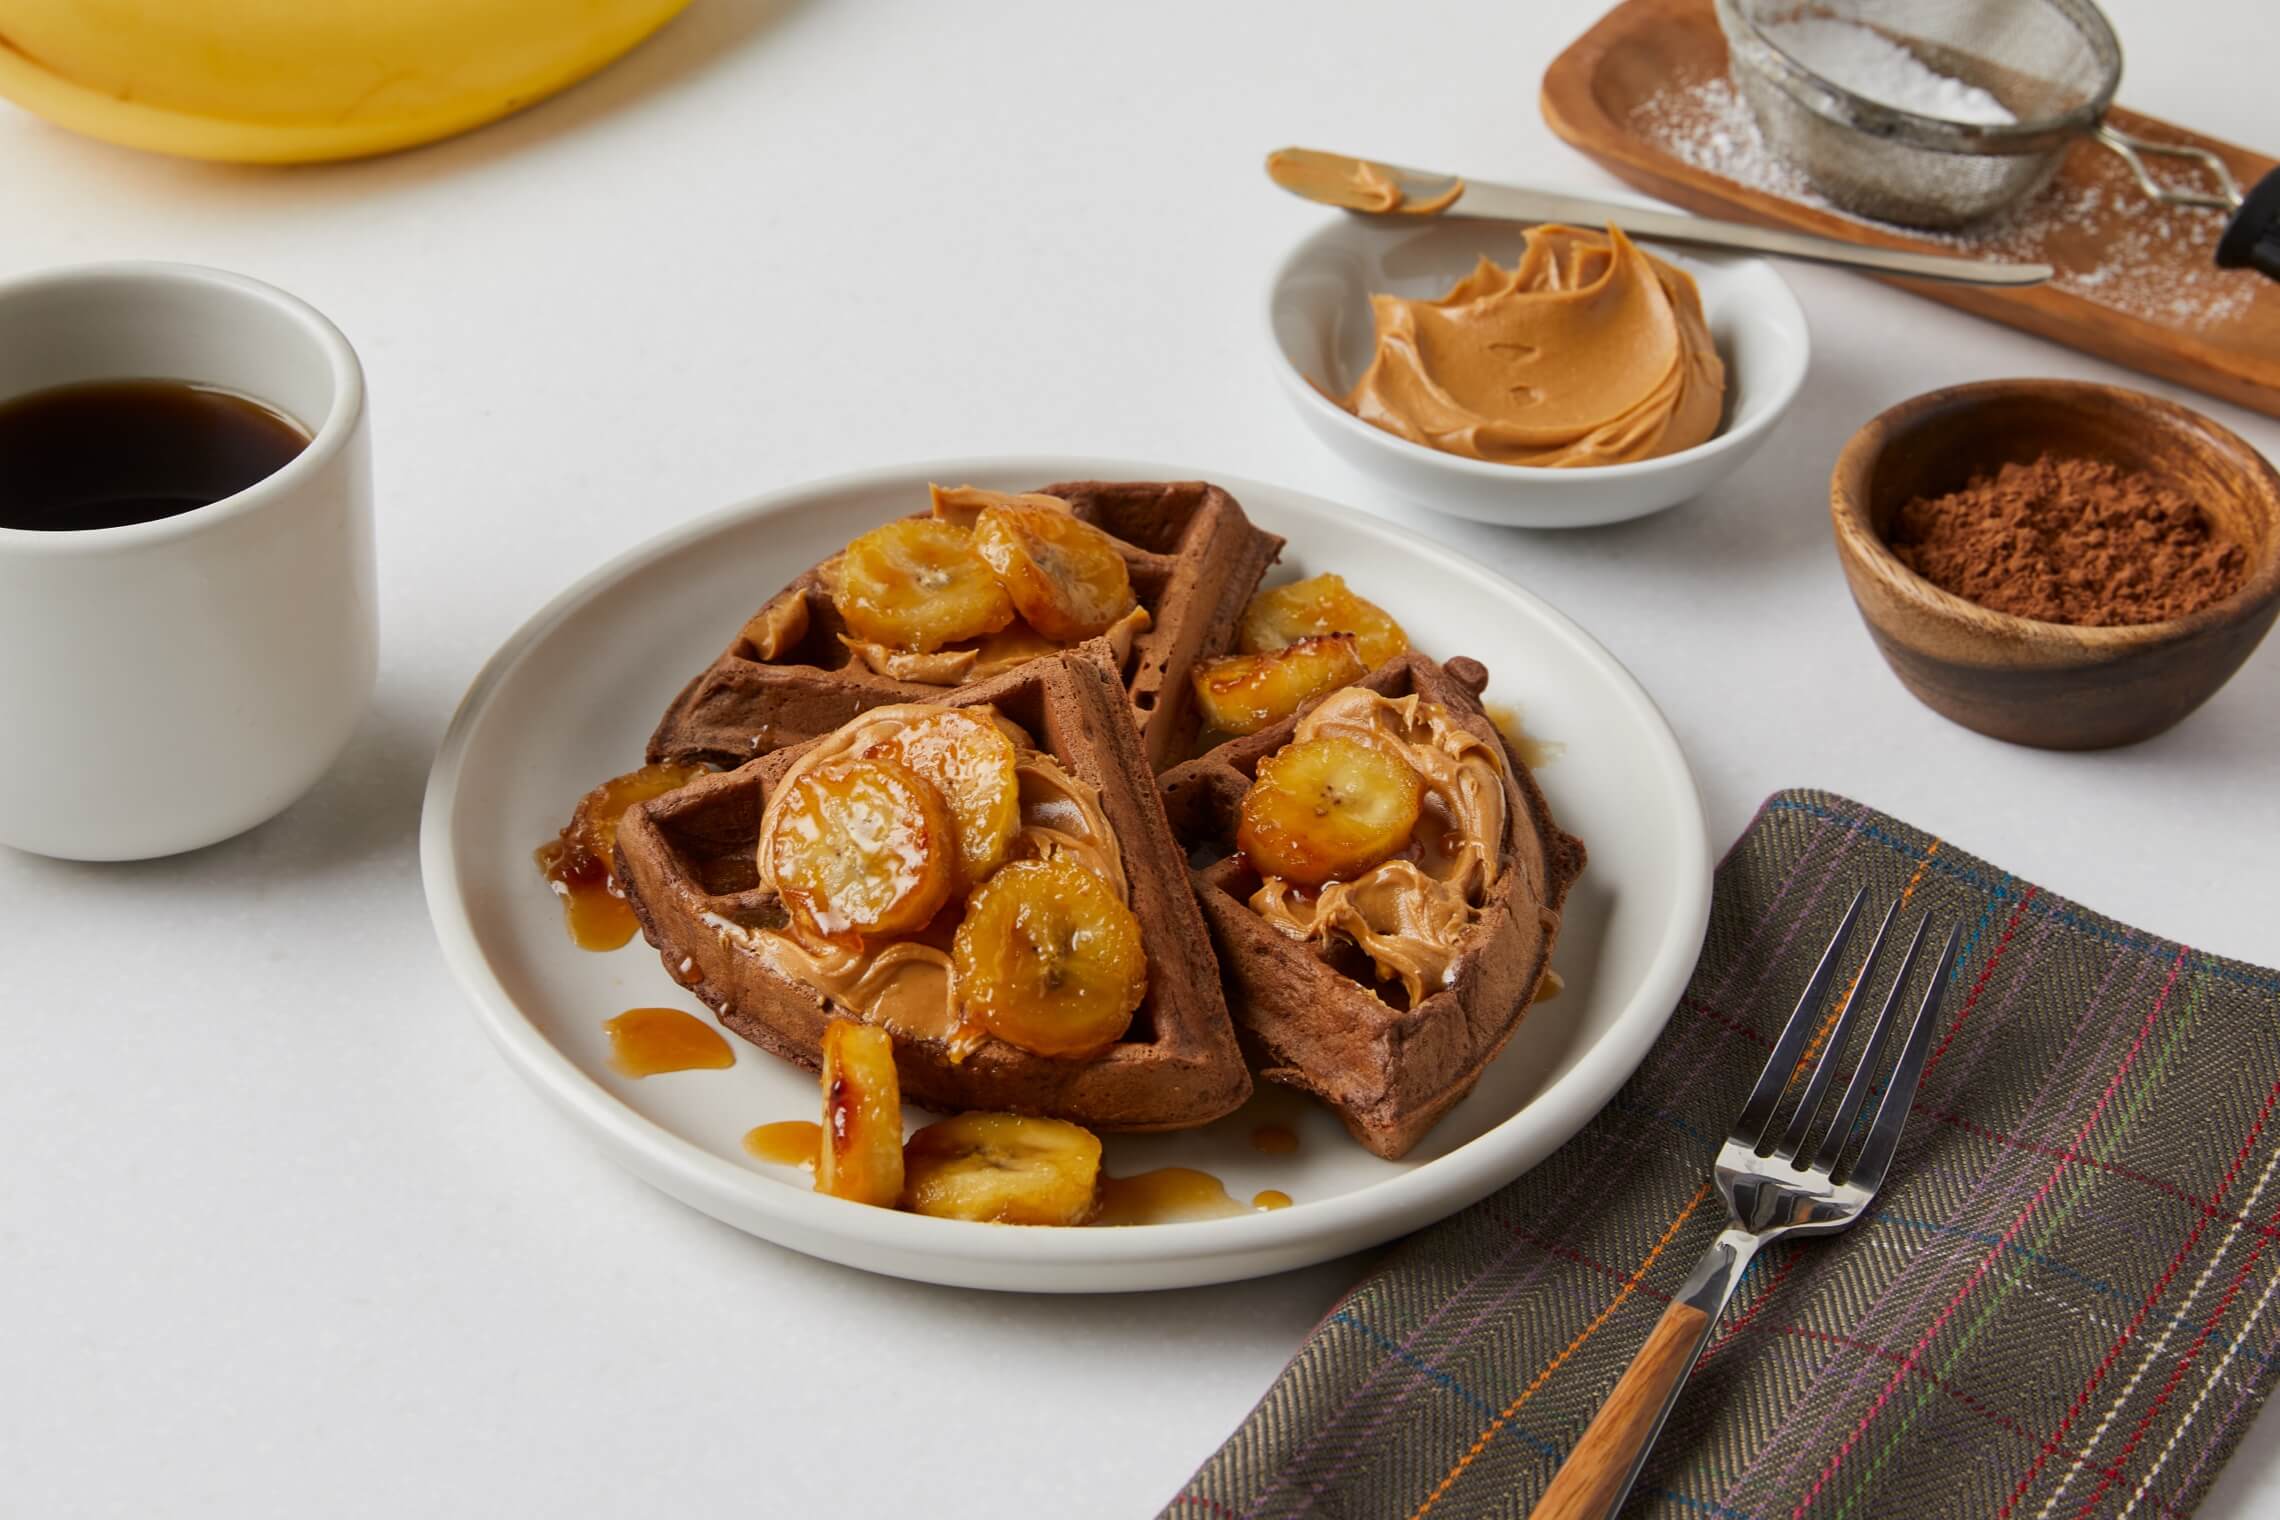 Chocolate Waffles with Peanut Butter and Caramelized Bananas